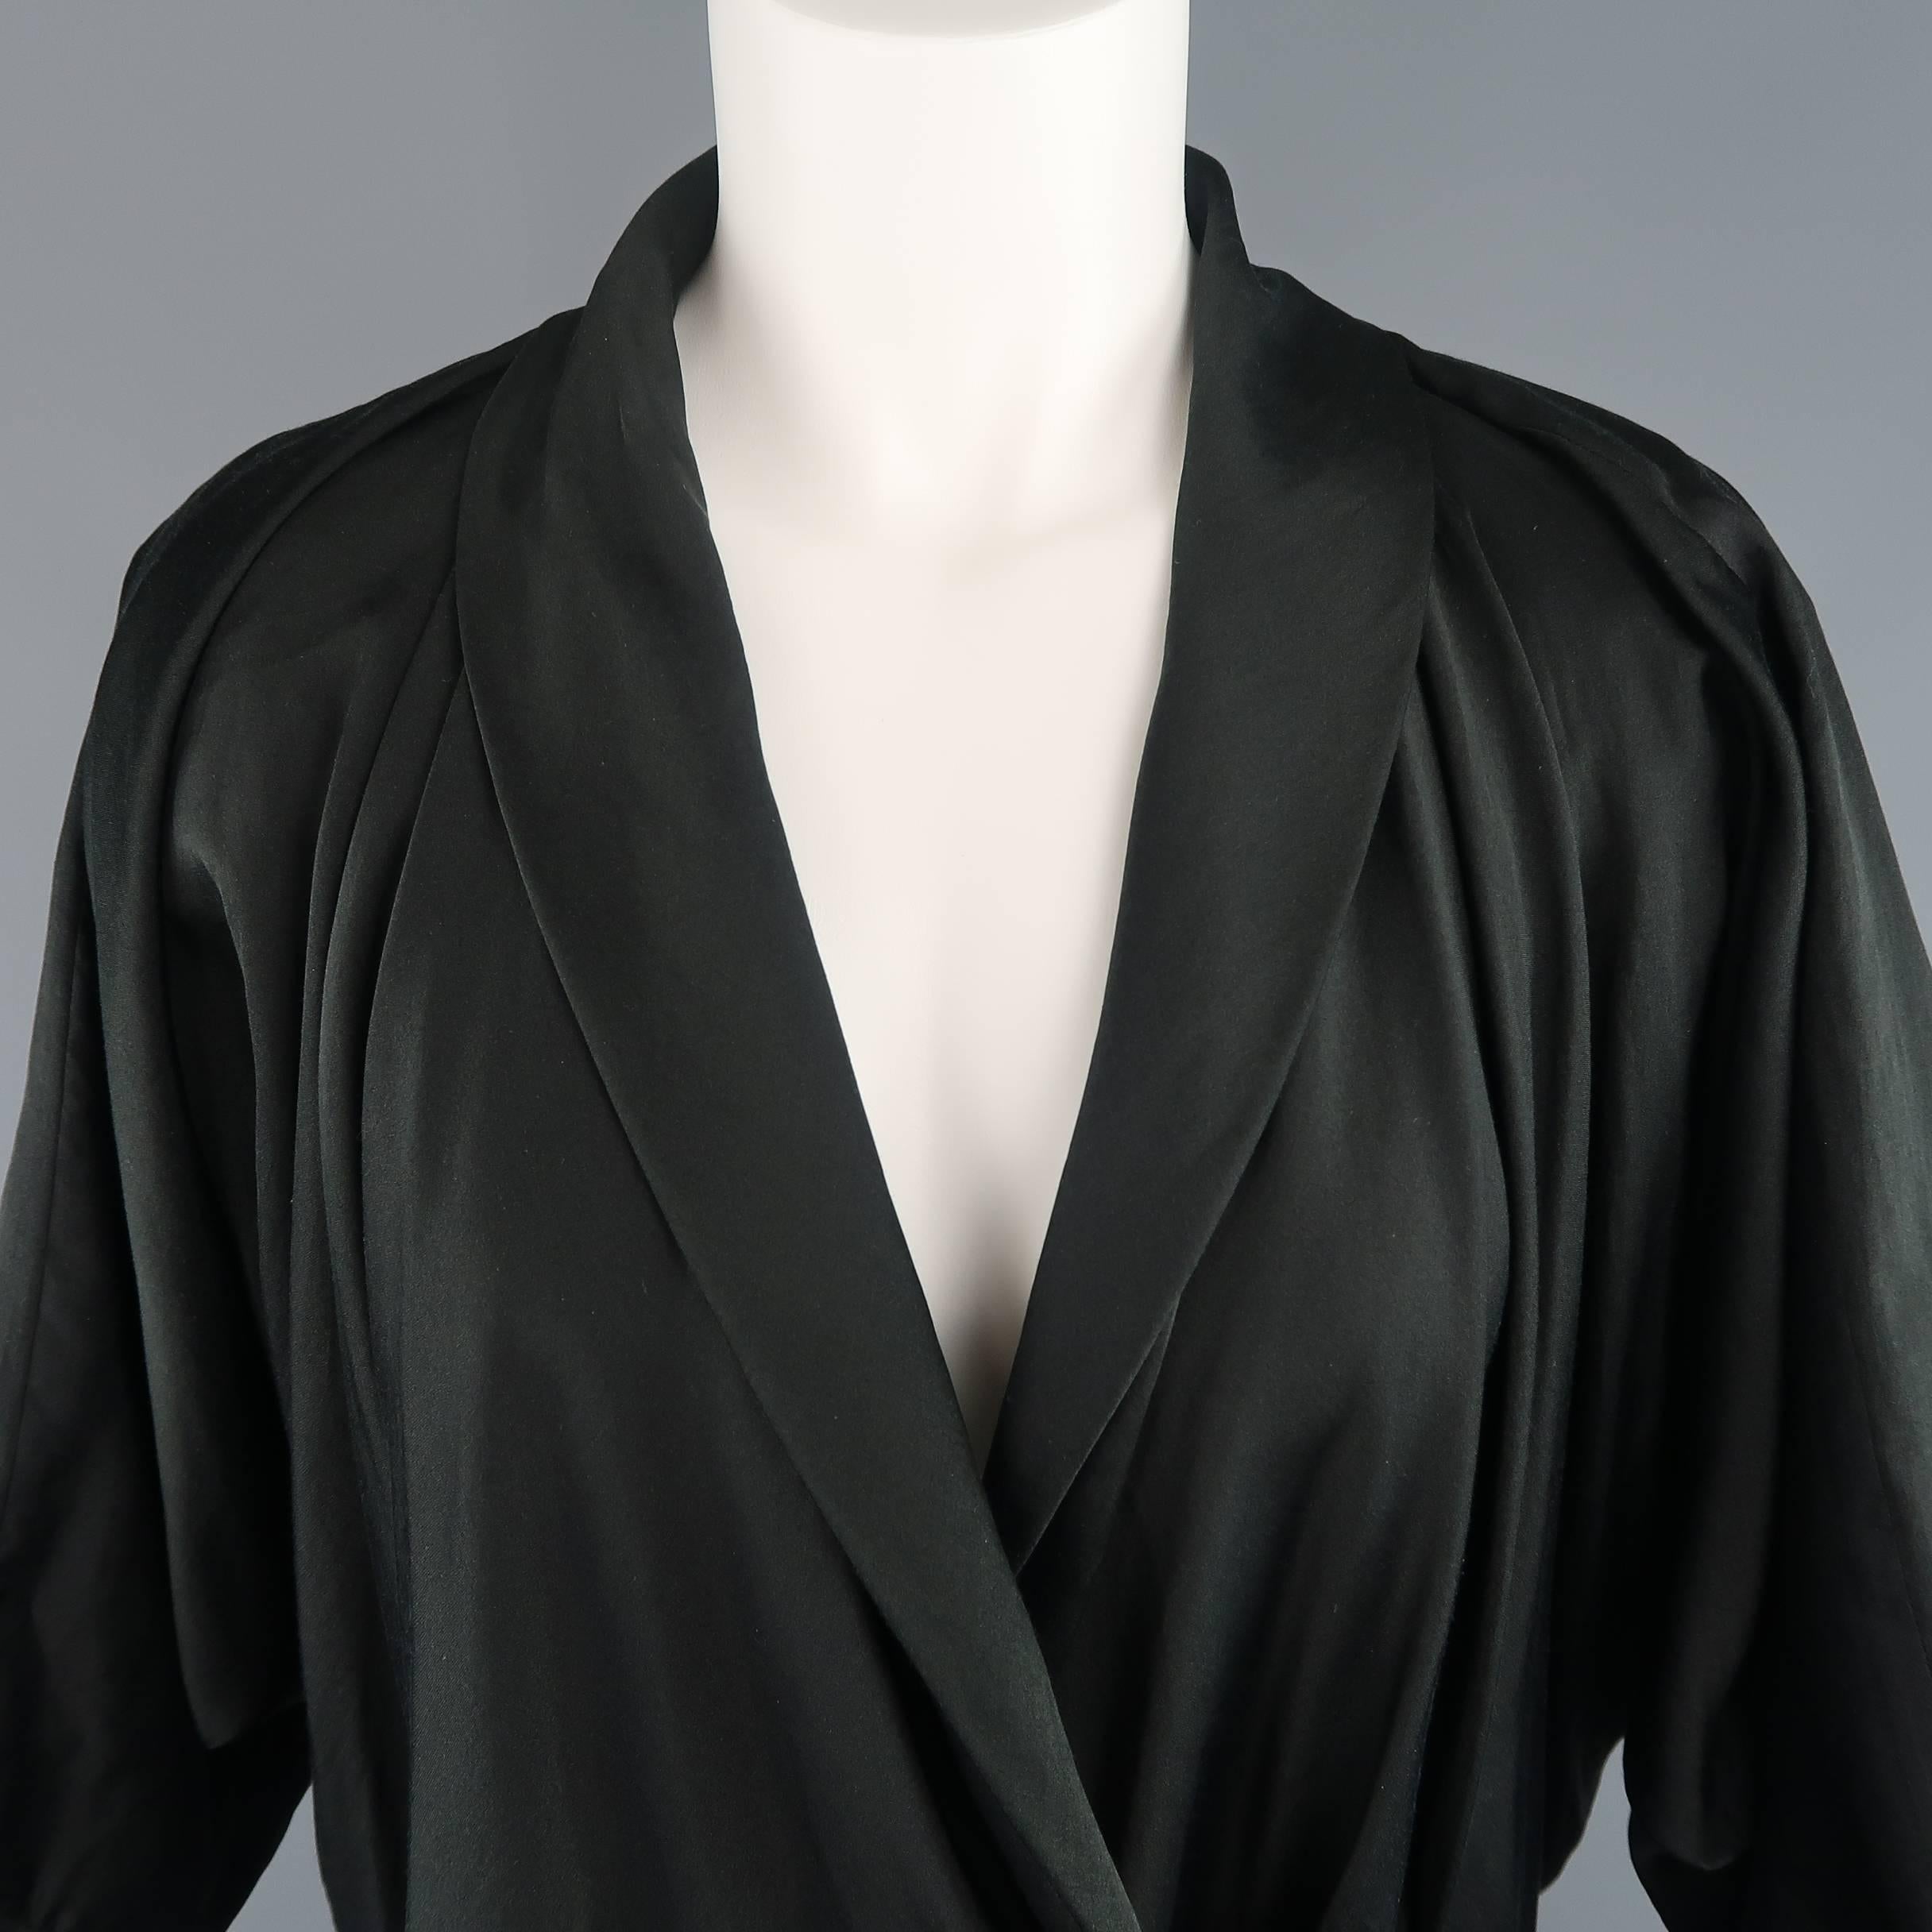 This LANVIN blouse comes in a light weight silk cotton blend sateen and features a tie and hook eye closure wrap front, shawl collar lapel, three quarter dolman sleeve with raw edge piping trim, and pleated drape shoulders. Made in France.
